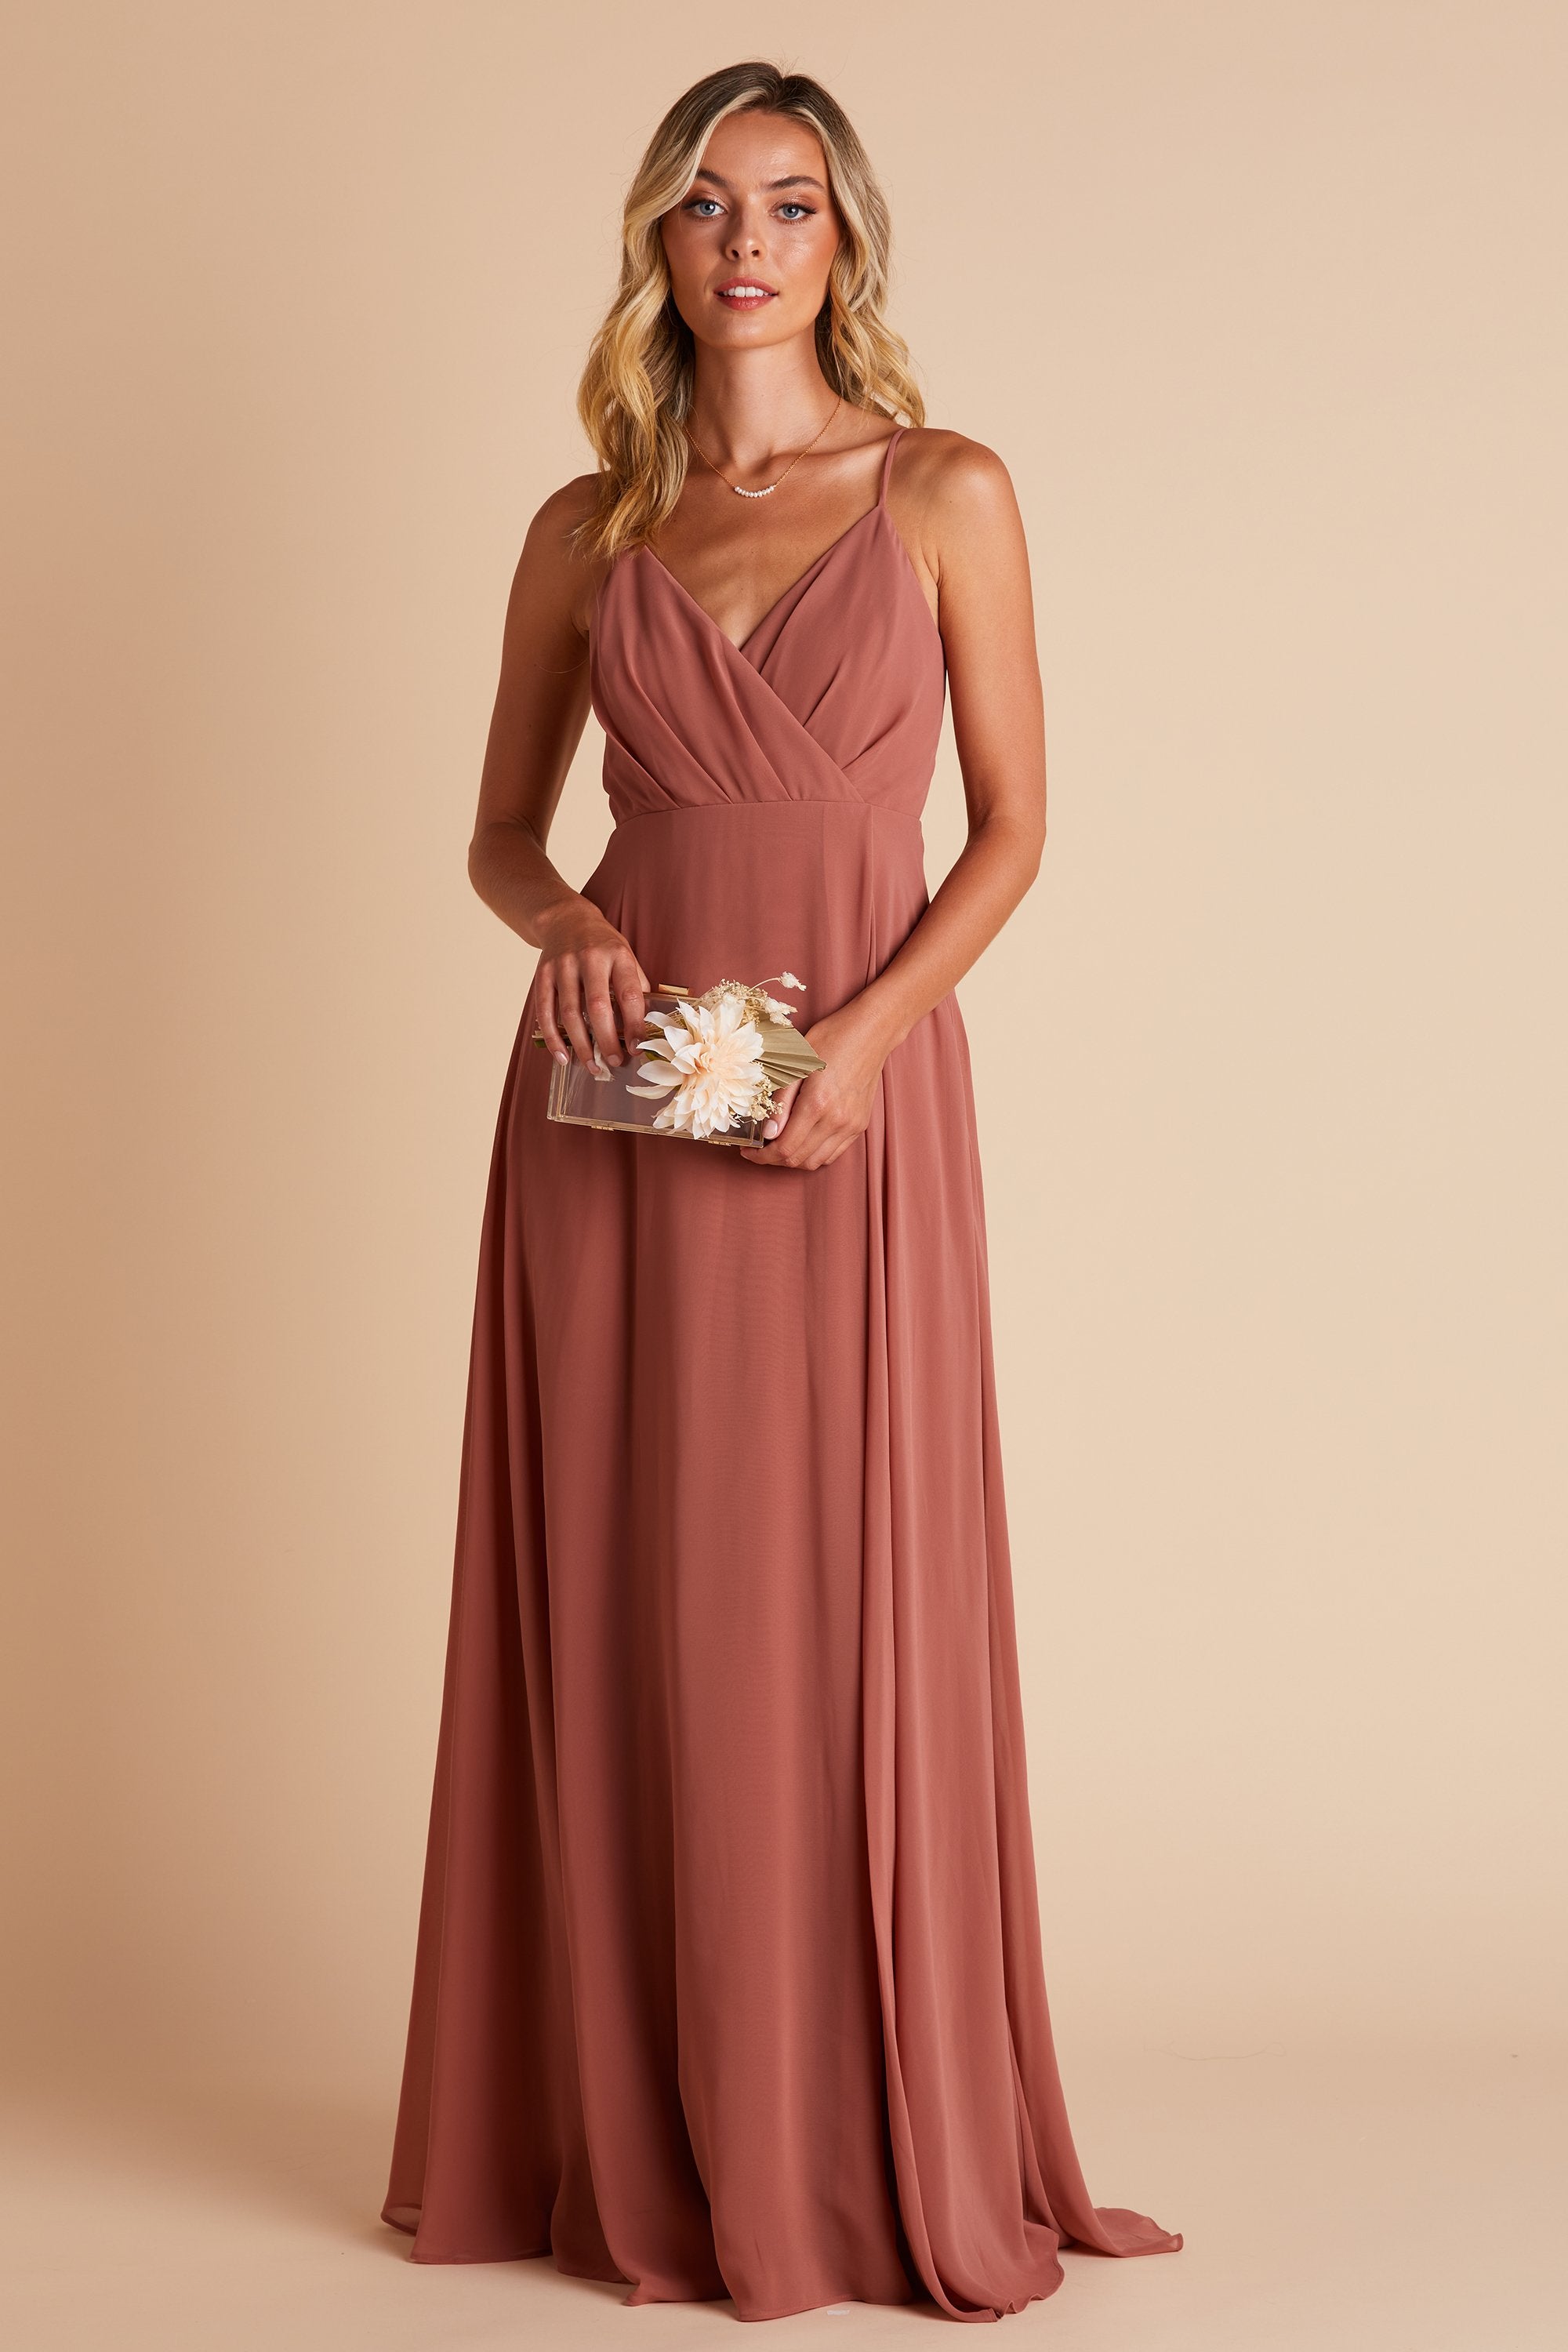 Front view of the Kaia Dress in desert rose chiffon worn by a slender model with a light skin tone. 